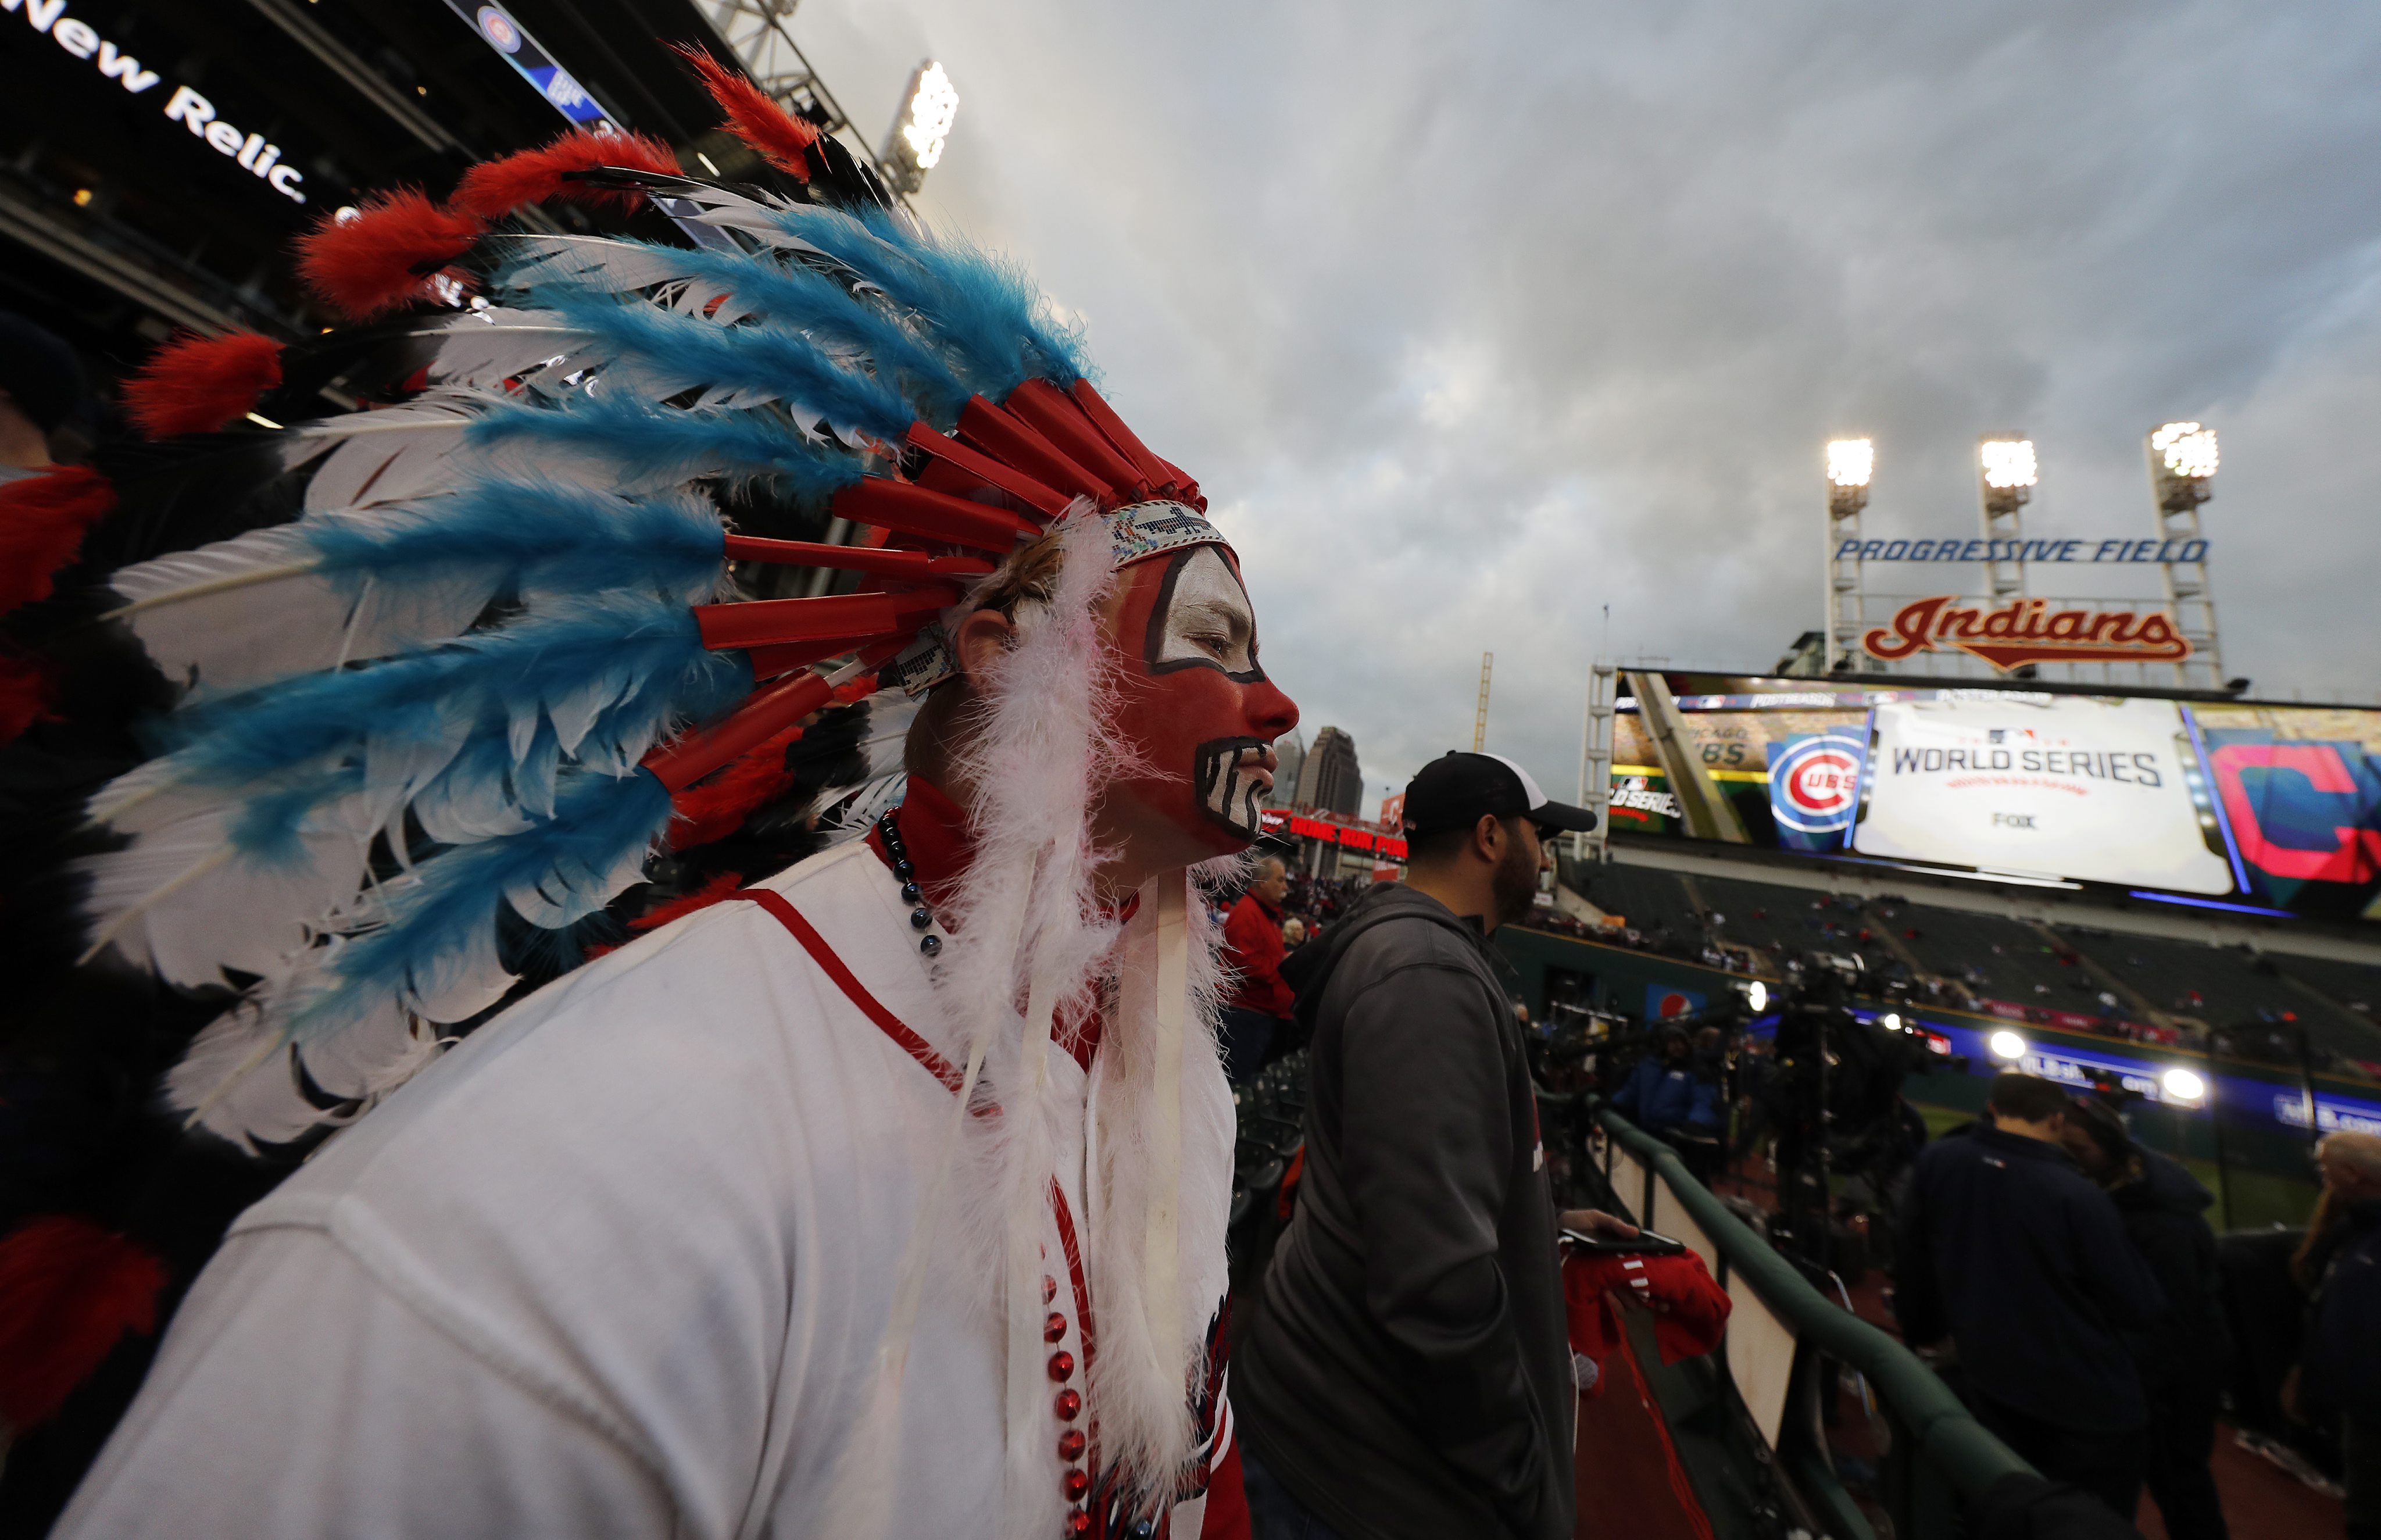 10 photos of Indians fans wearing racist costumes to the World Series